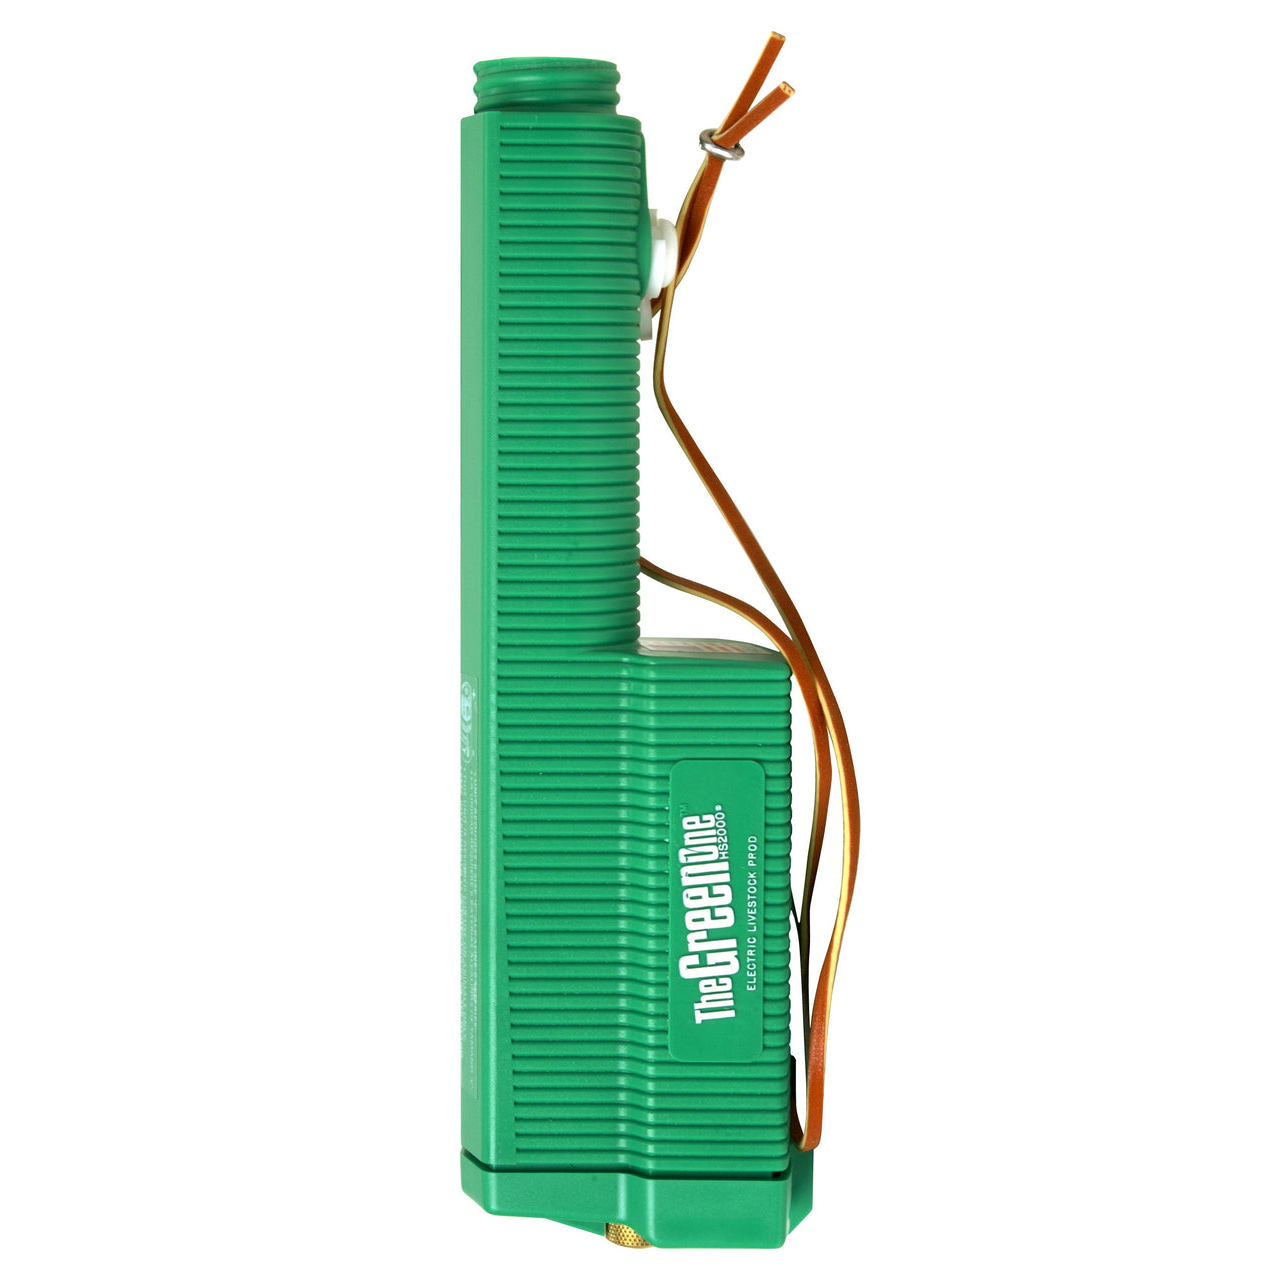 HOTSHOT HS2000 The Green One Green Handle